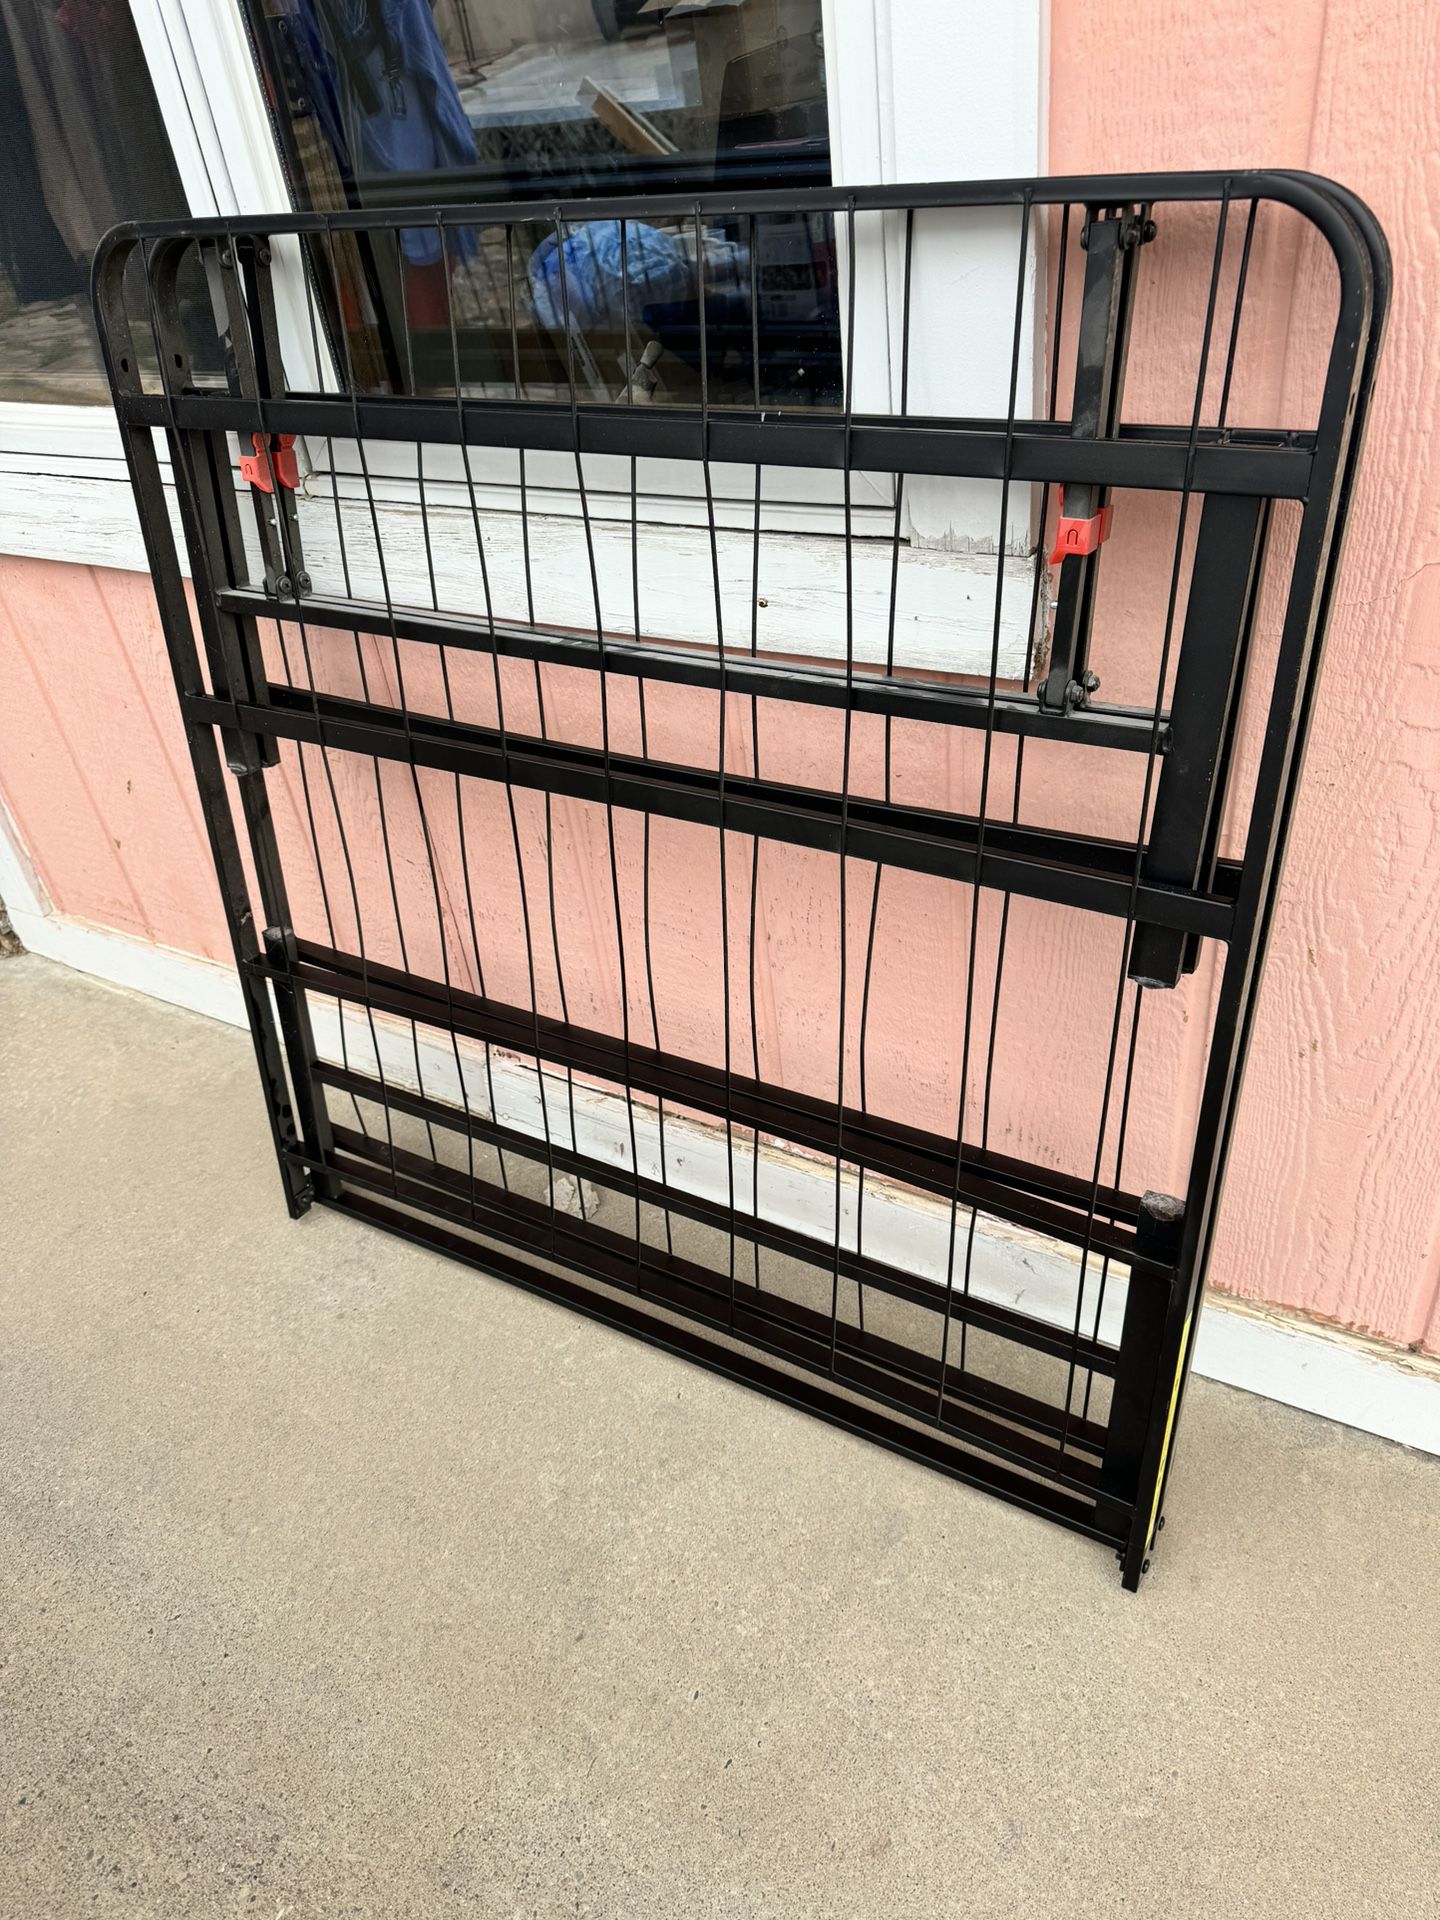 Twin XL Bed Frame 